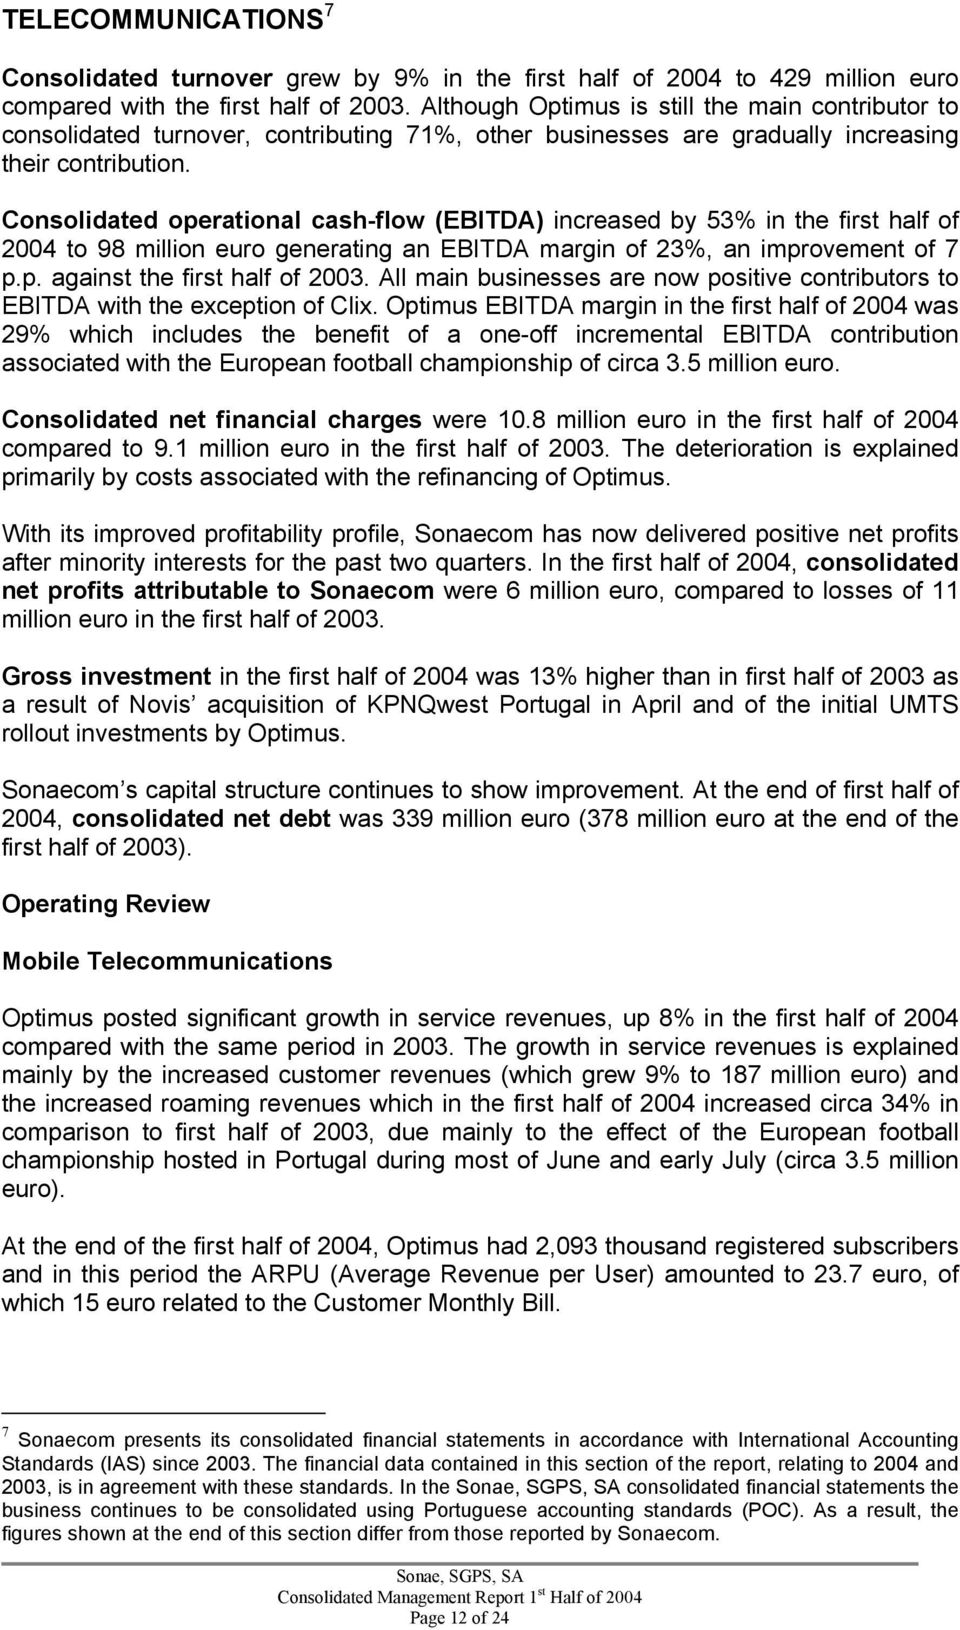 Consolidated operational cash-flow (EBITDA) increased by 53% in the first half of 2004 to 98 million generating an EBITDA margin of 23%, an improvement of 7 p.p. against the first half of 2003.